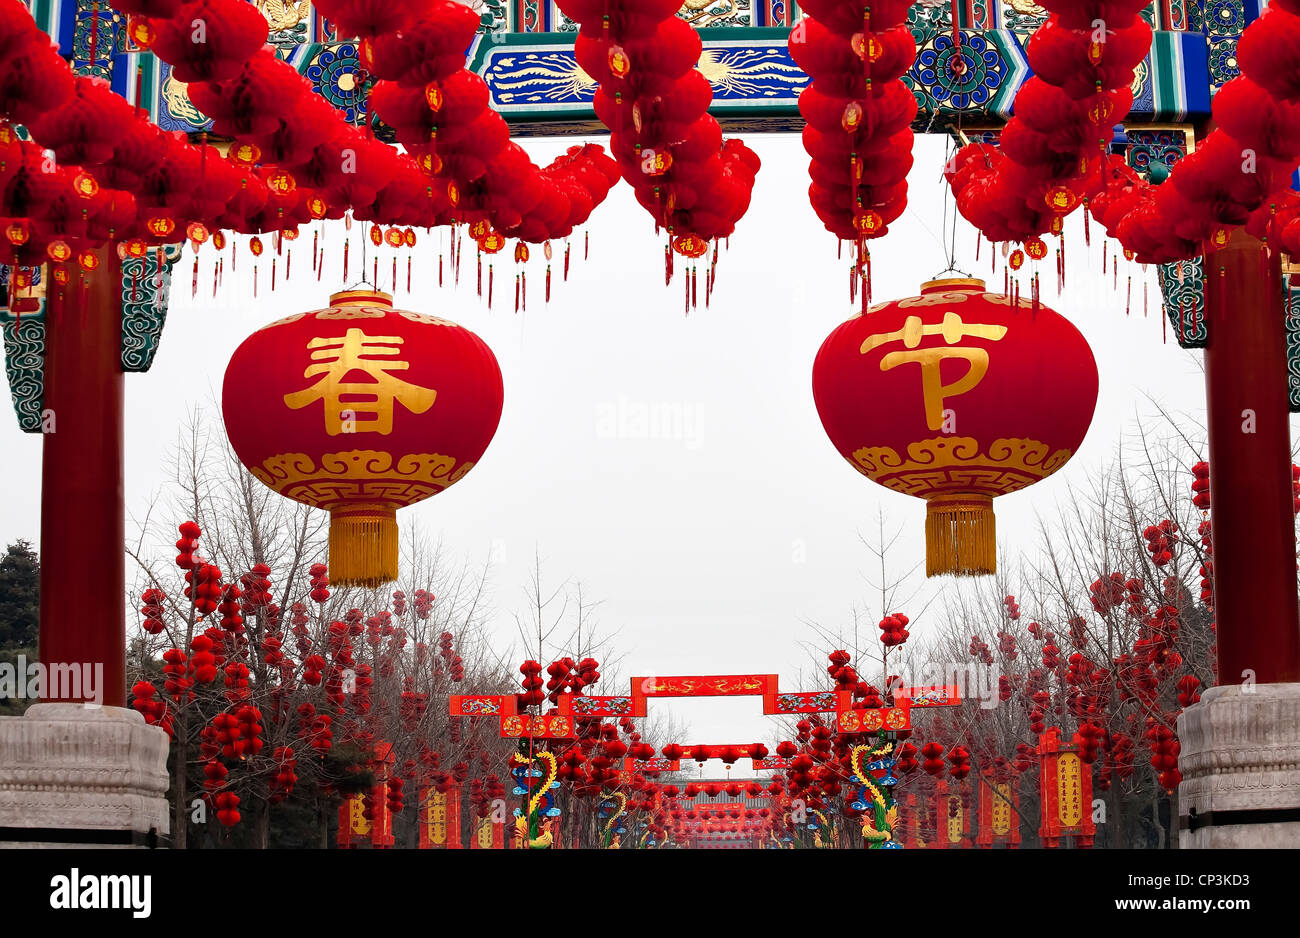 Large Spring Festival Red Lanterns Chinese Lunar New Year Decorations Stock Photo Alamy